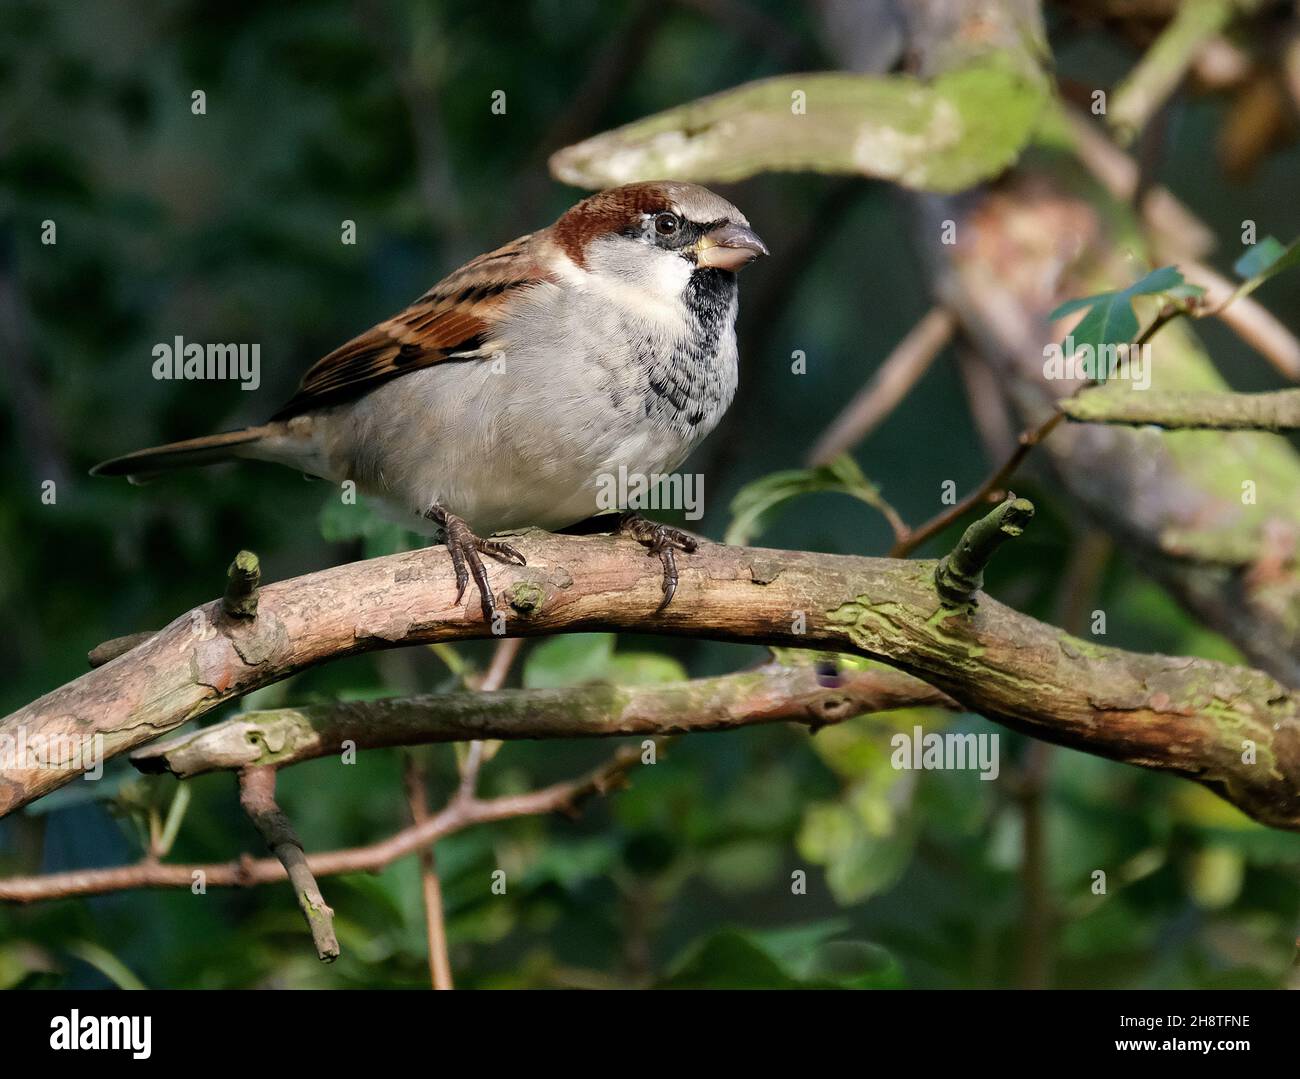 House sparrow on branch in urban house garden looking for food. Stock Photo